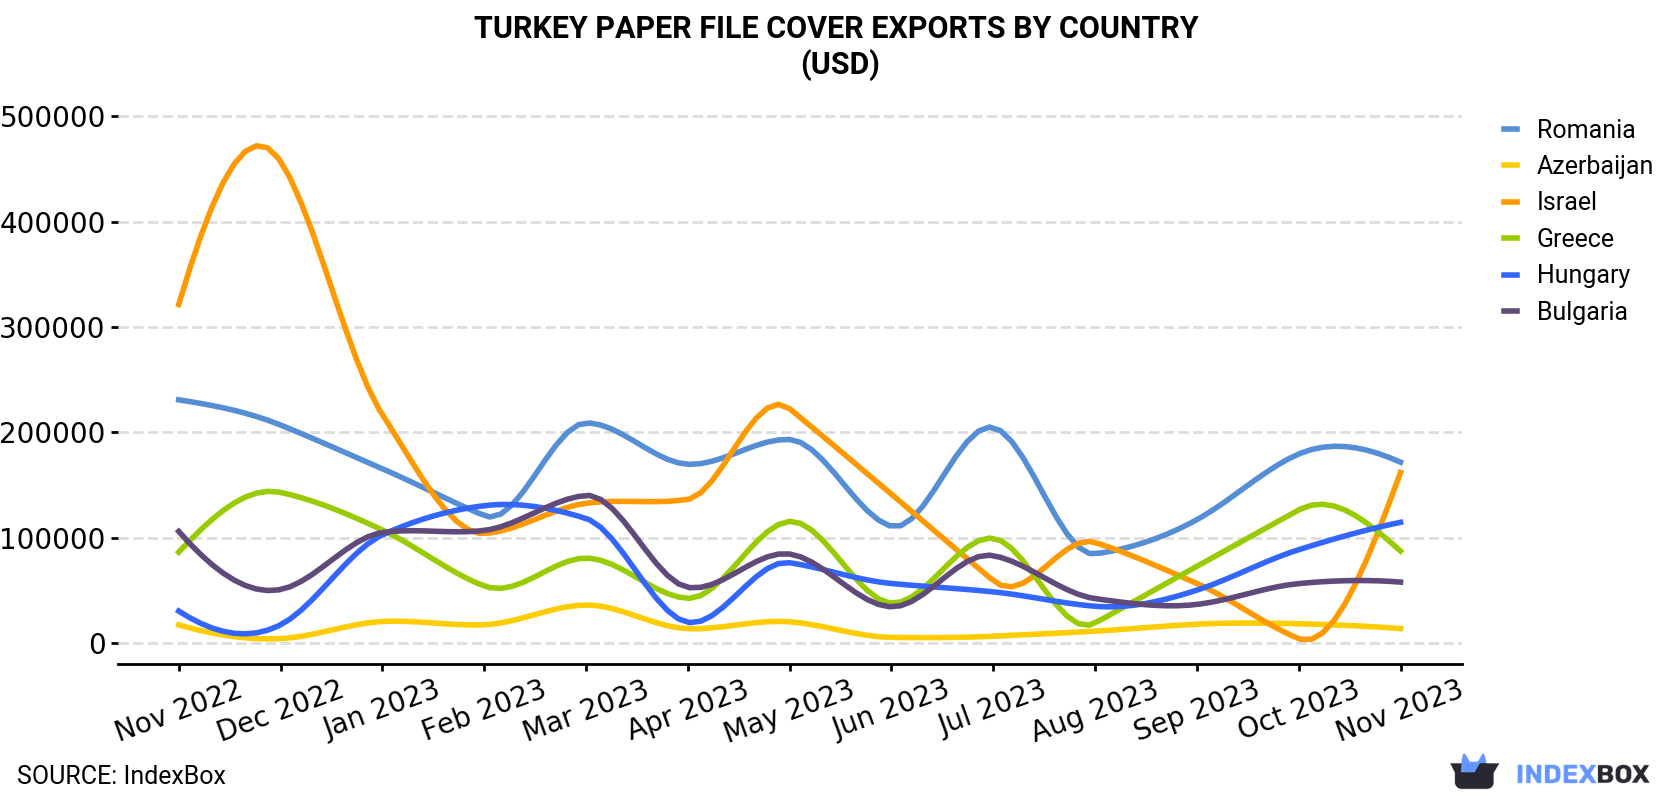 Turkey Paper File Cover Exports By Country (USD)